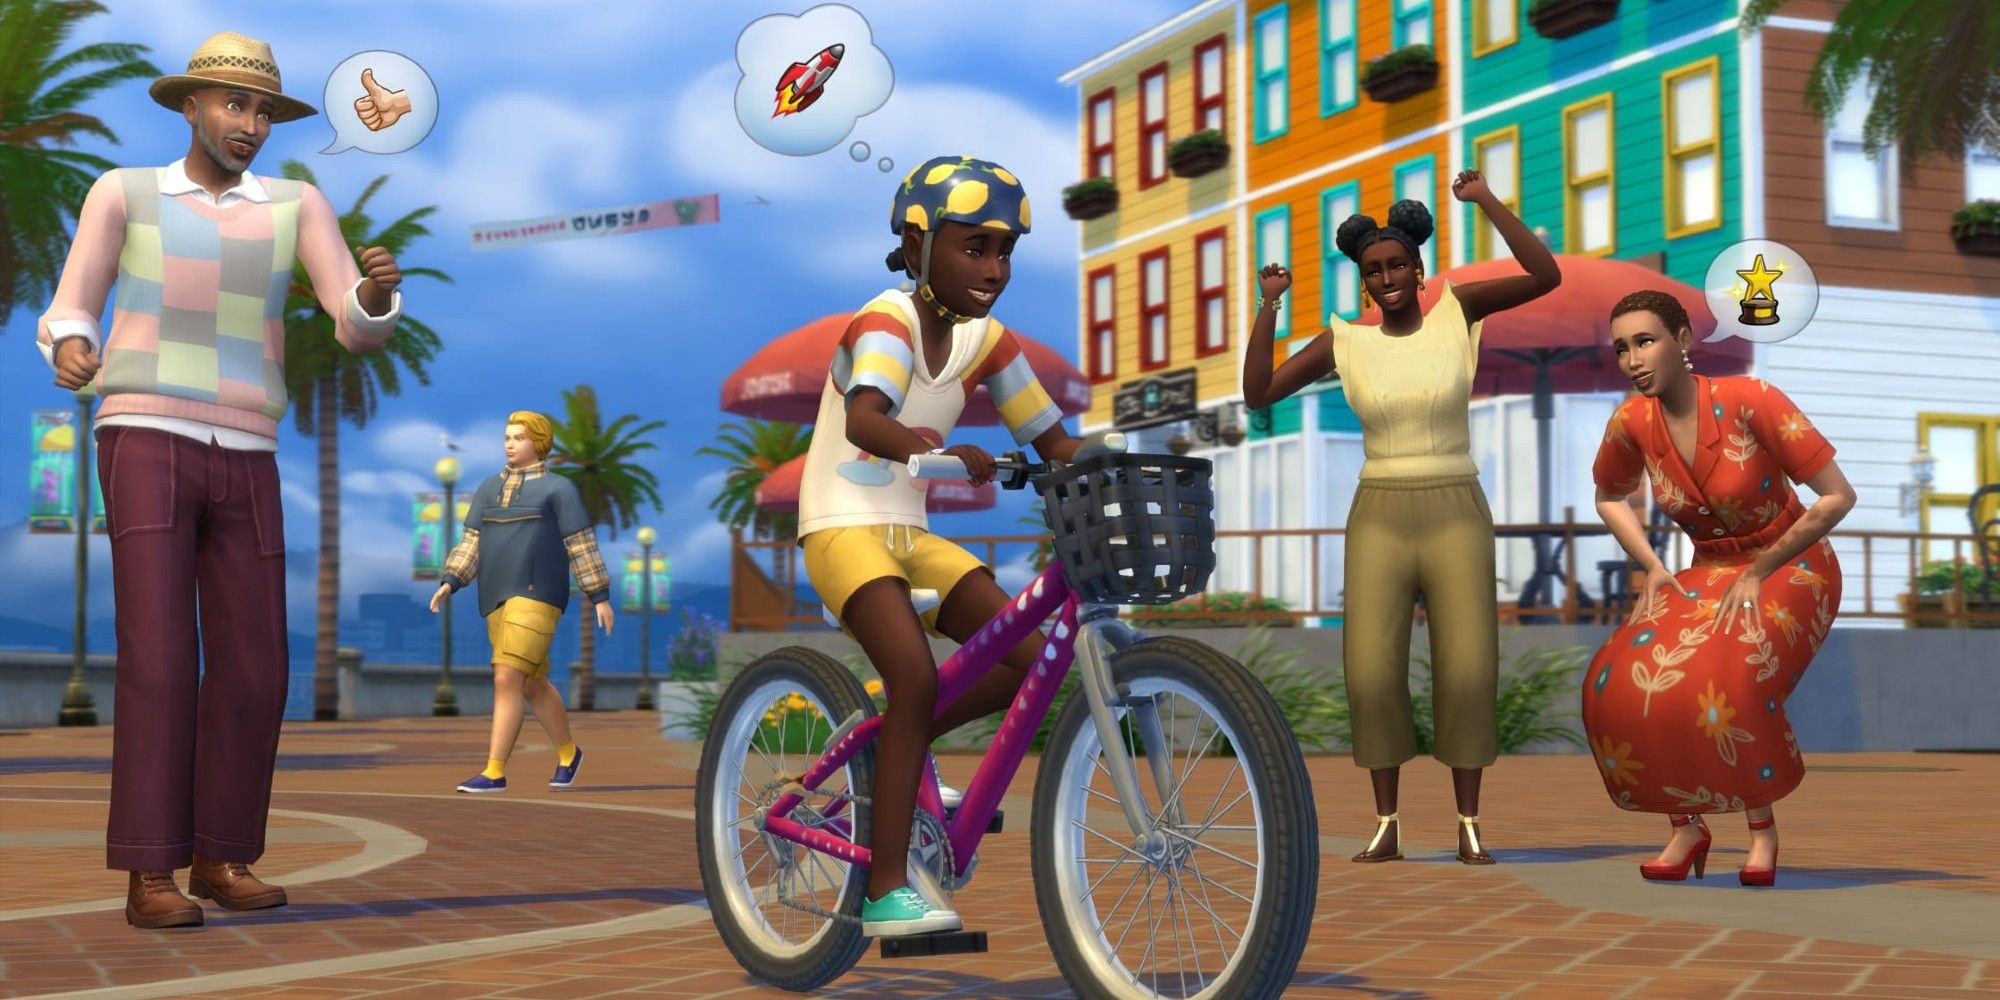 Sims 4 Growing Together EP image showing a child riding a bike and relatives cheering him on.